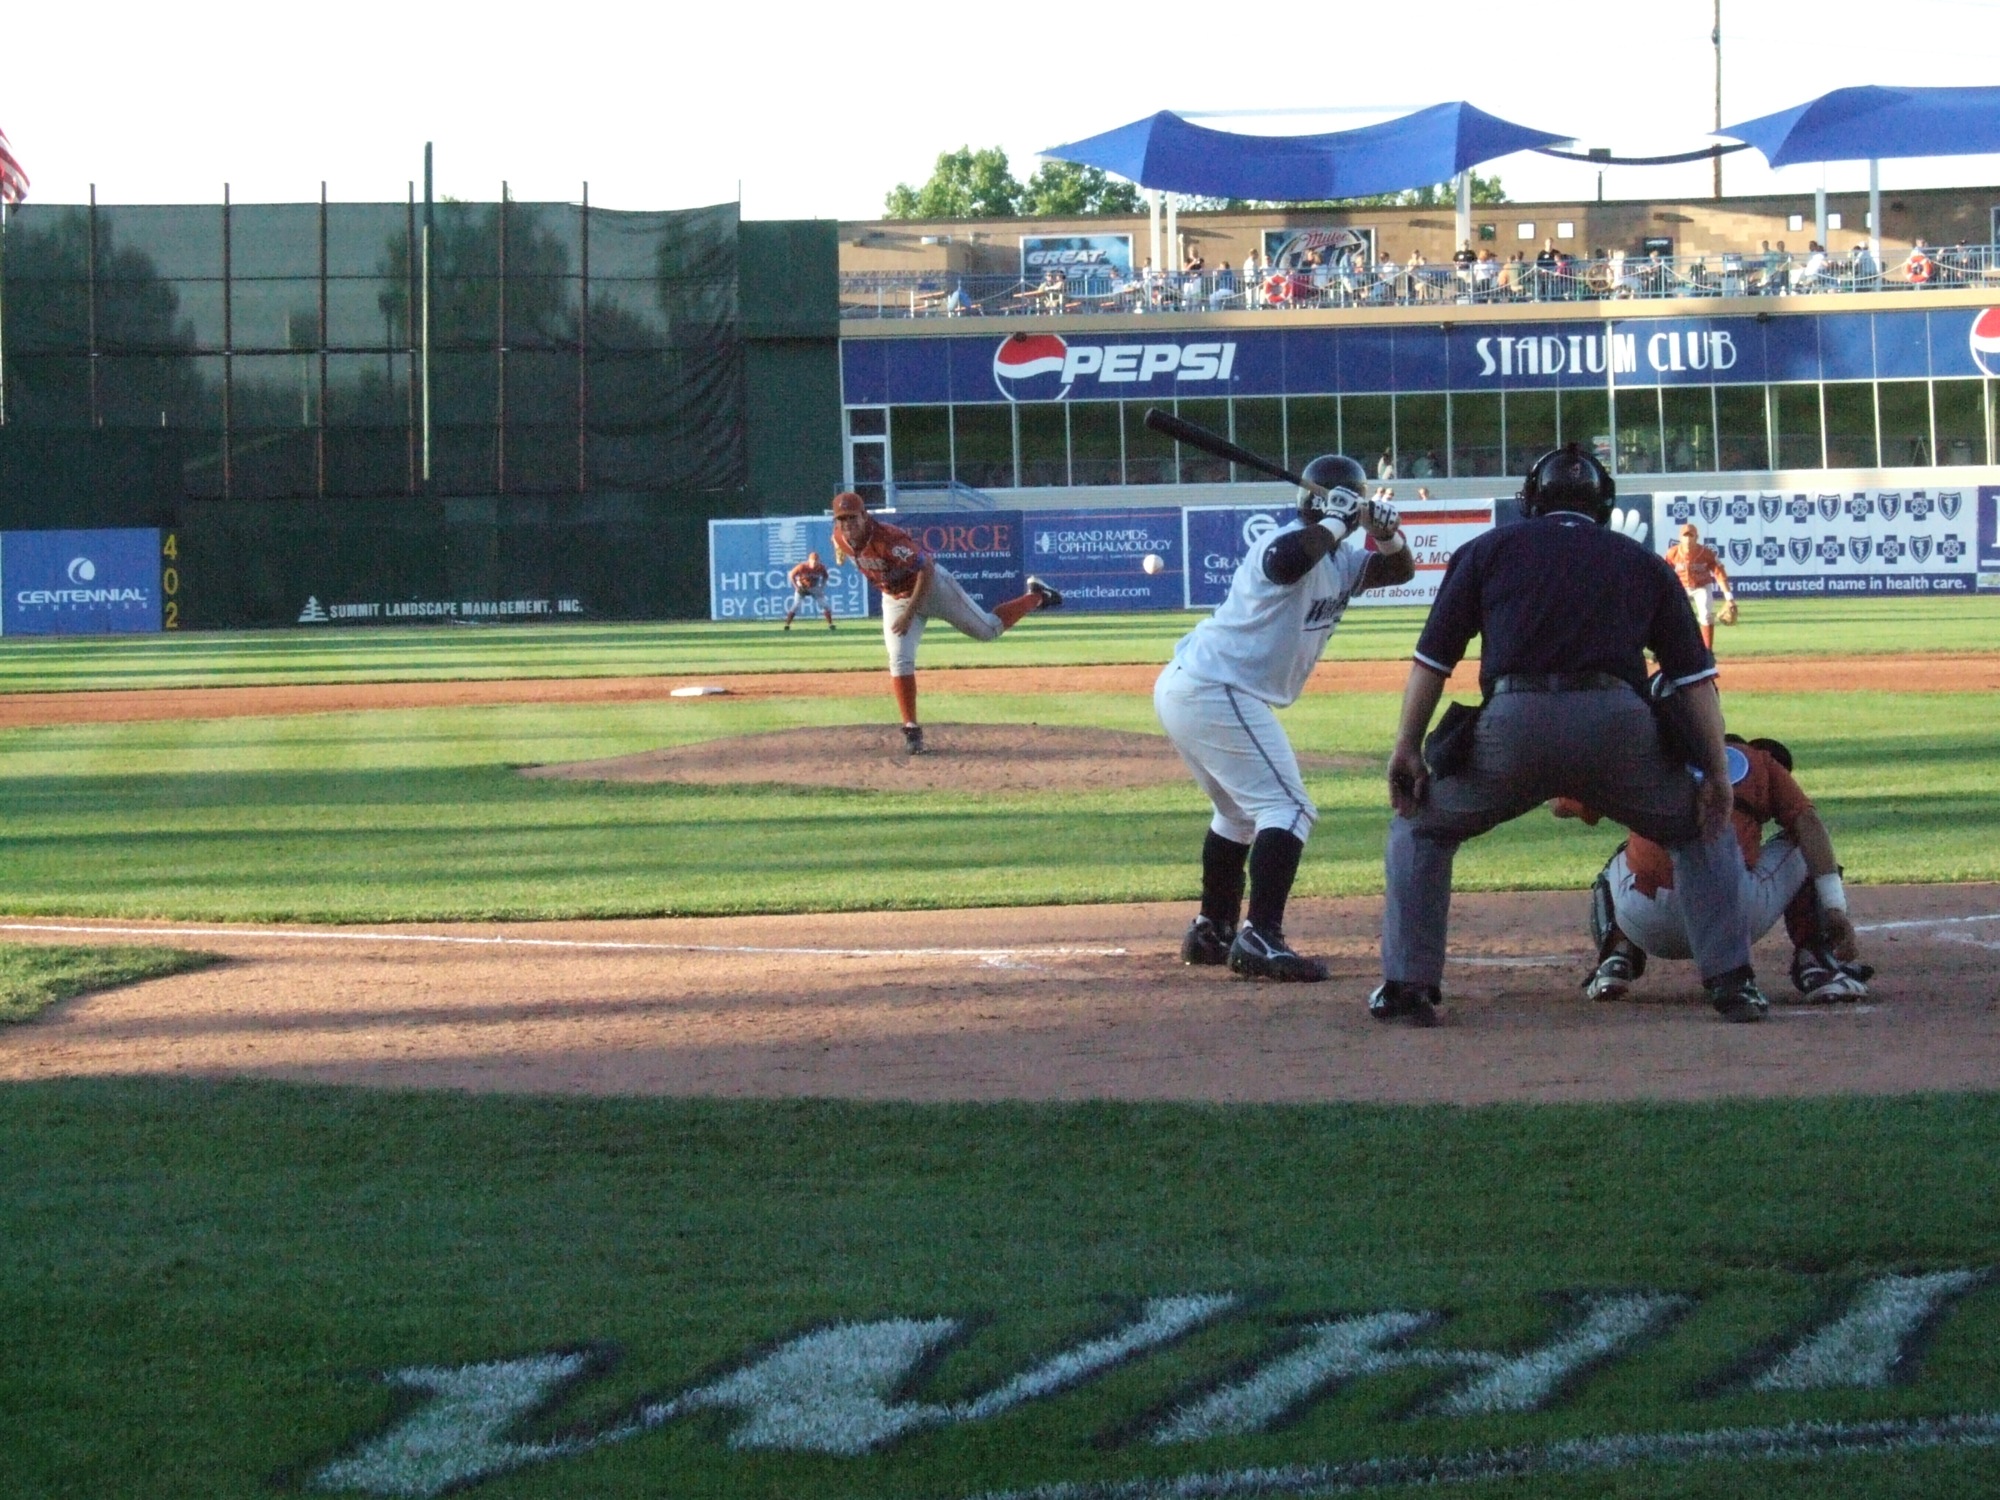 an umpire, catcher and batter in action on a baseball field